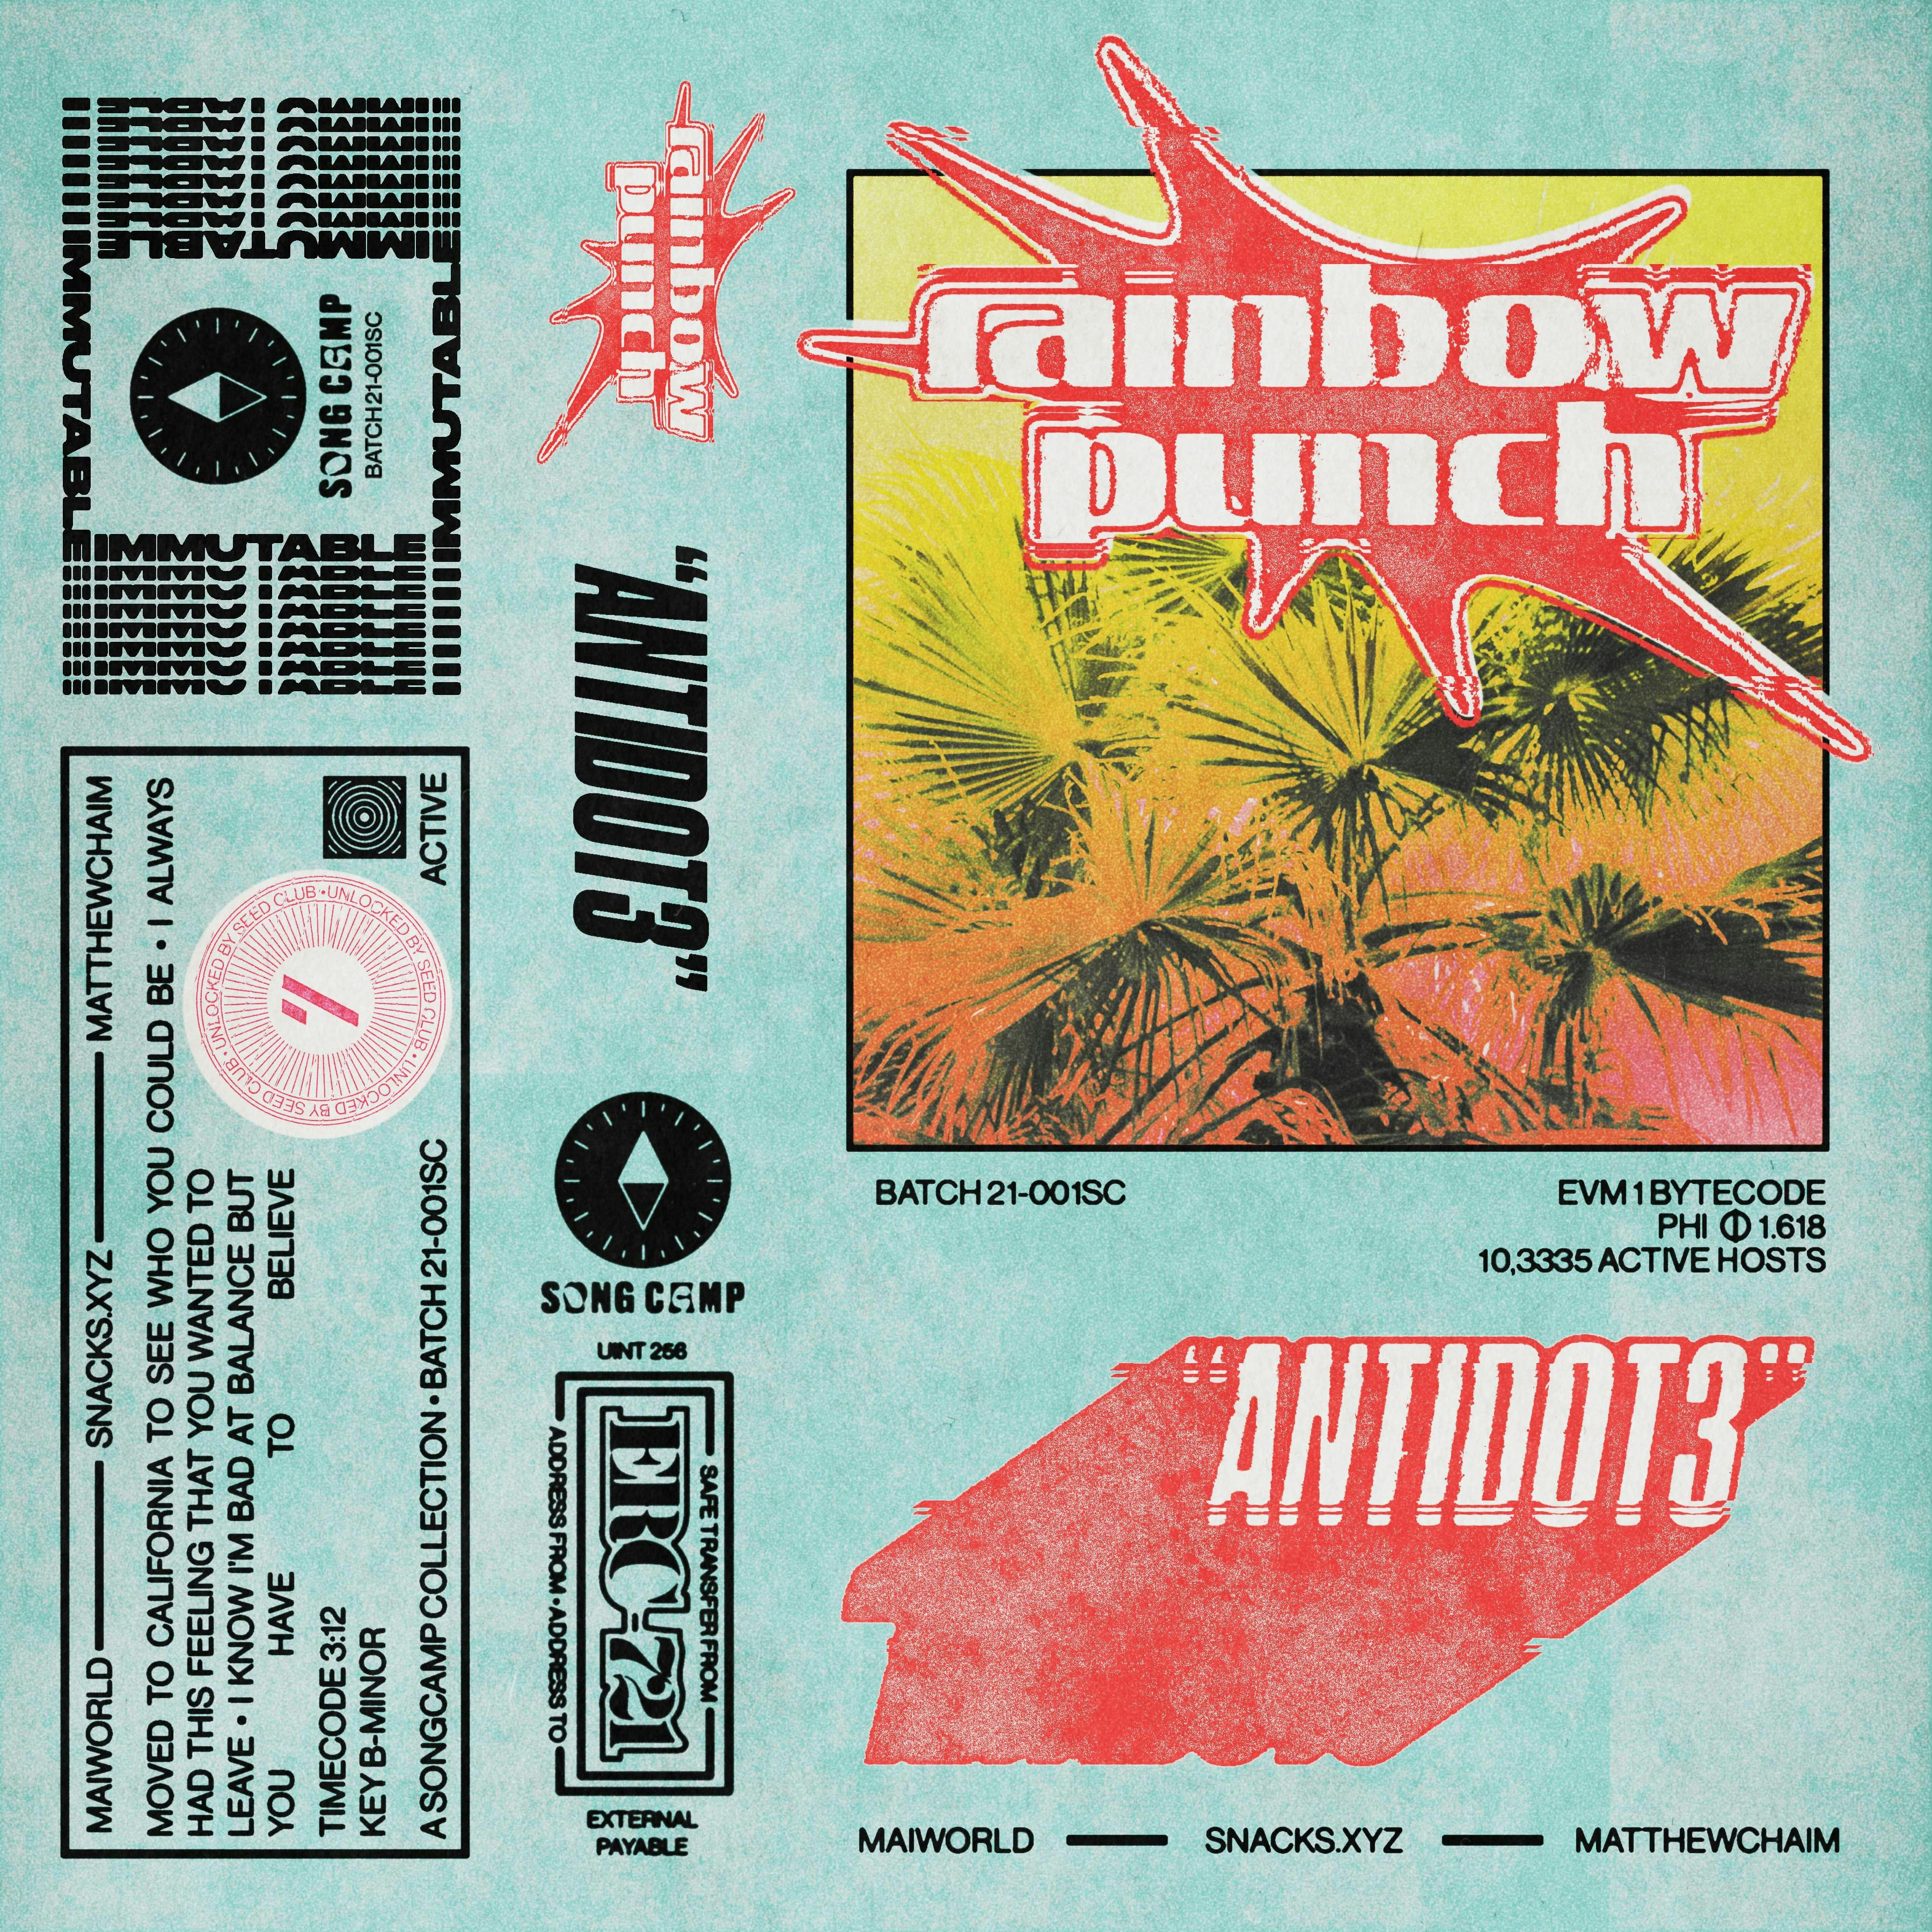 Cover art for Rainbow Punch's song: Antid0t3